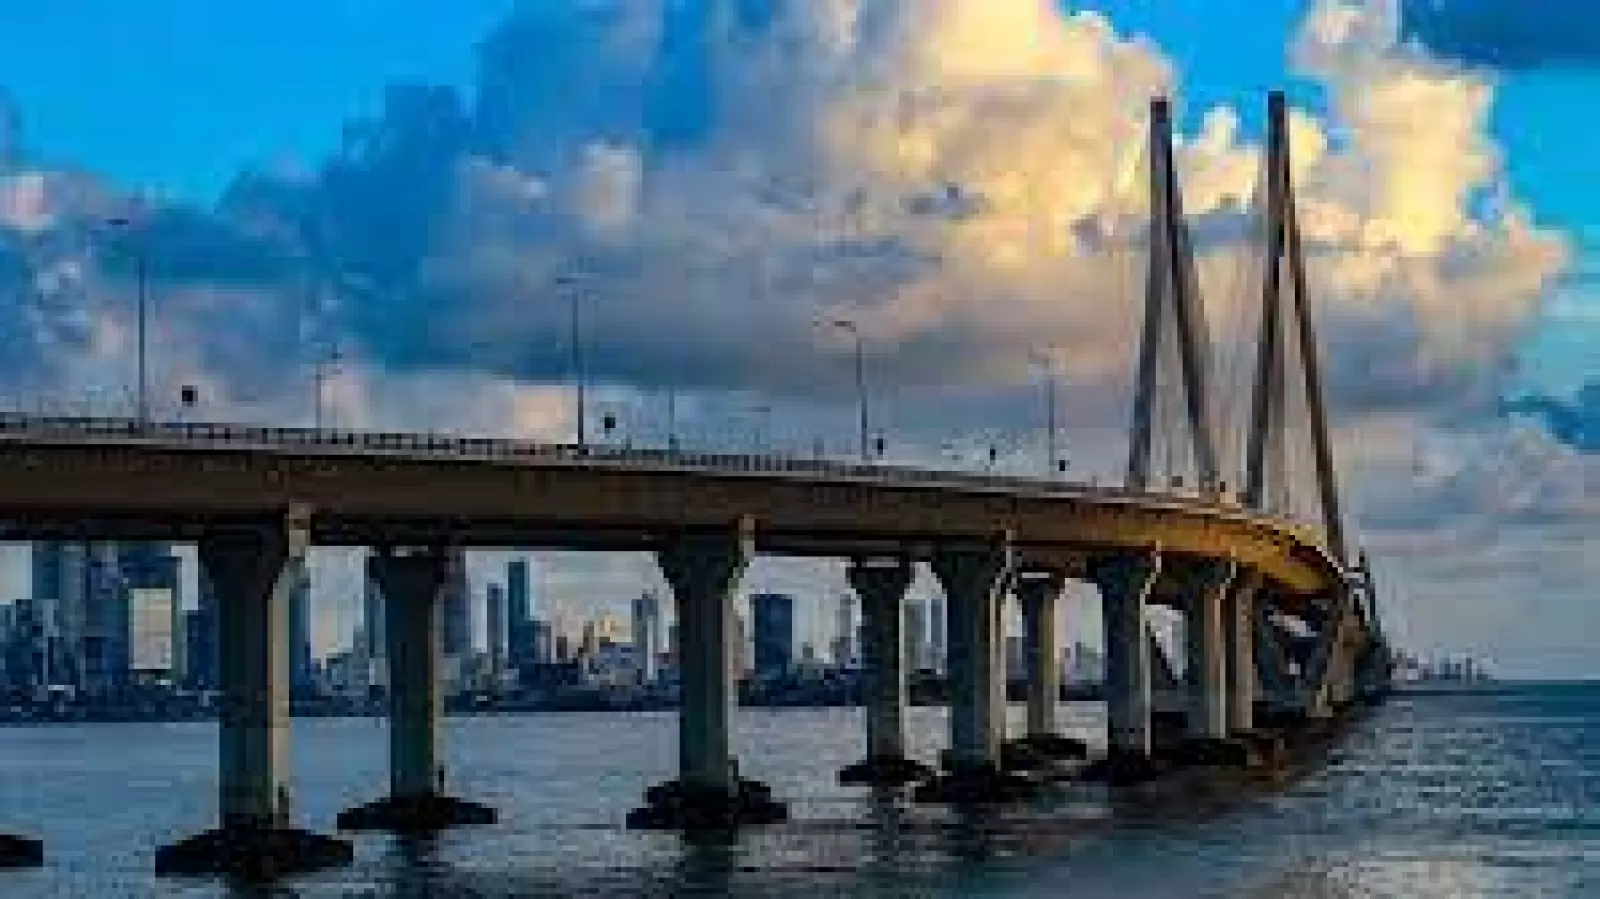 Toll rates will increase on Bandra-Worli Sea Link from April 1, know how much the new fee